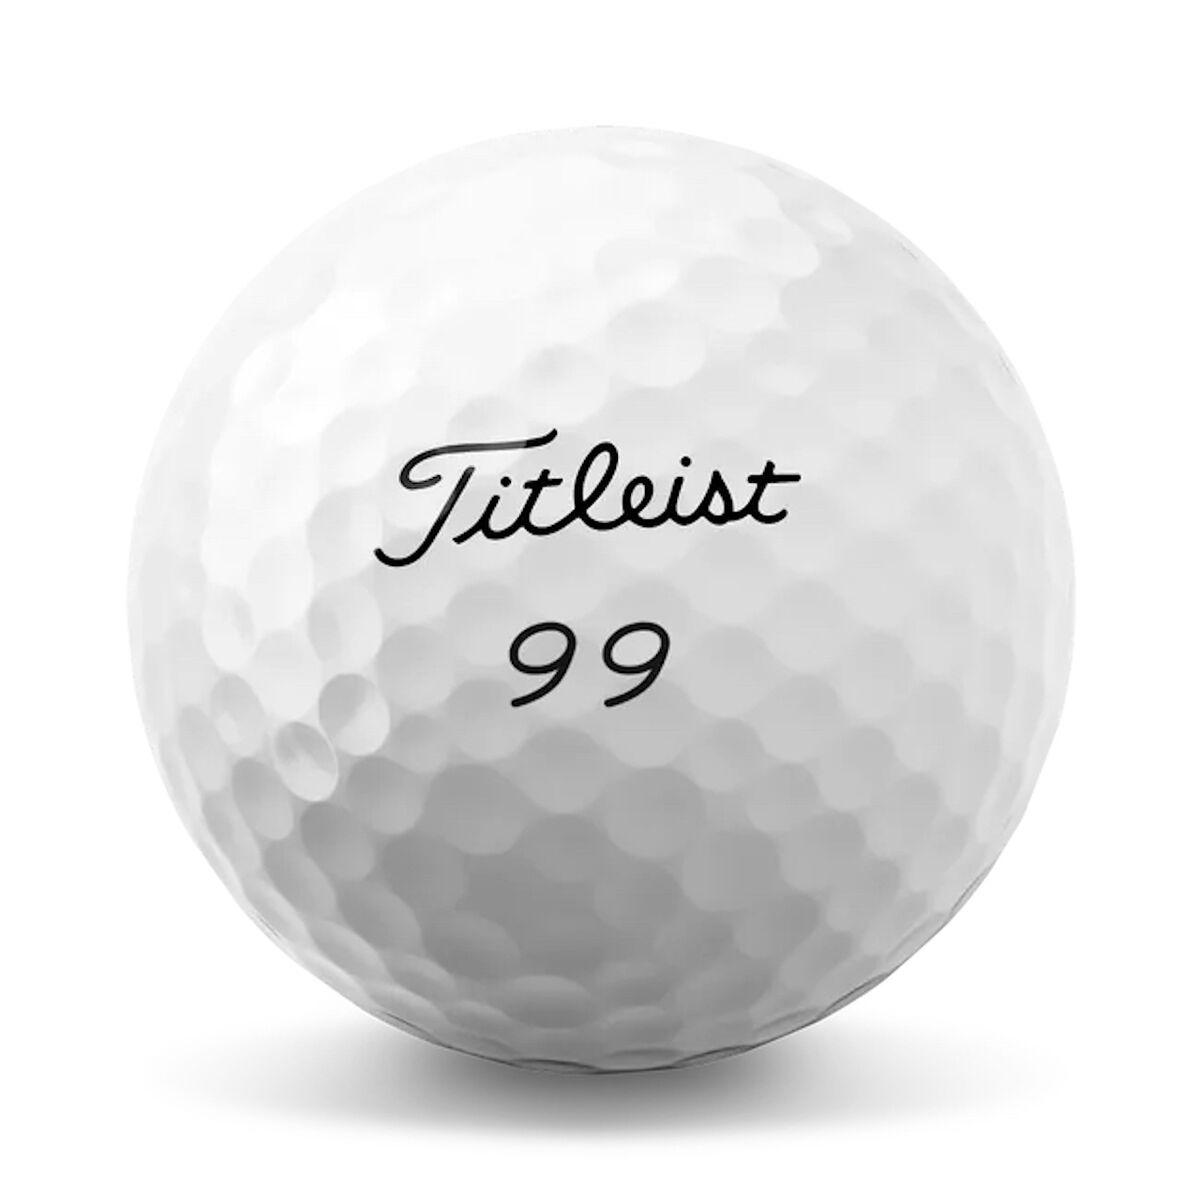 Be Creative with Custom Golf Ball Stamps 